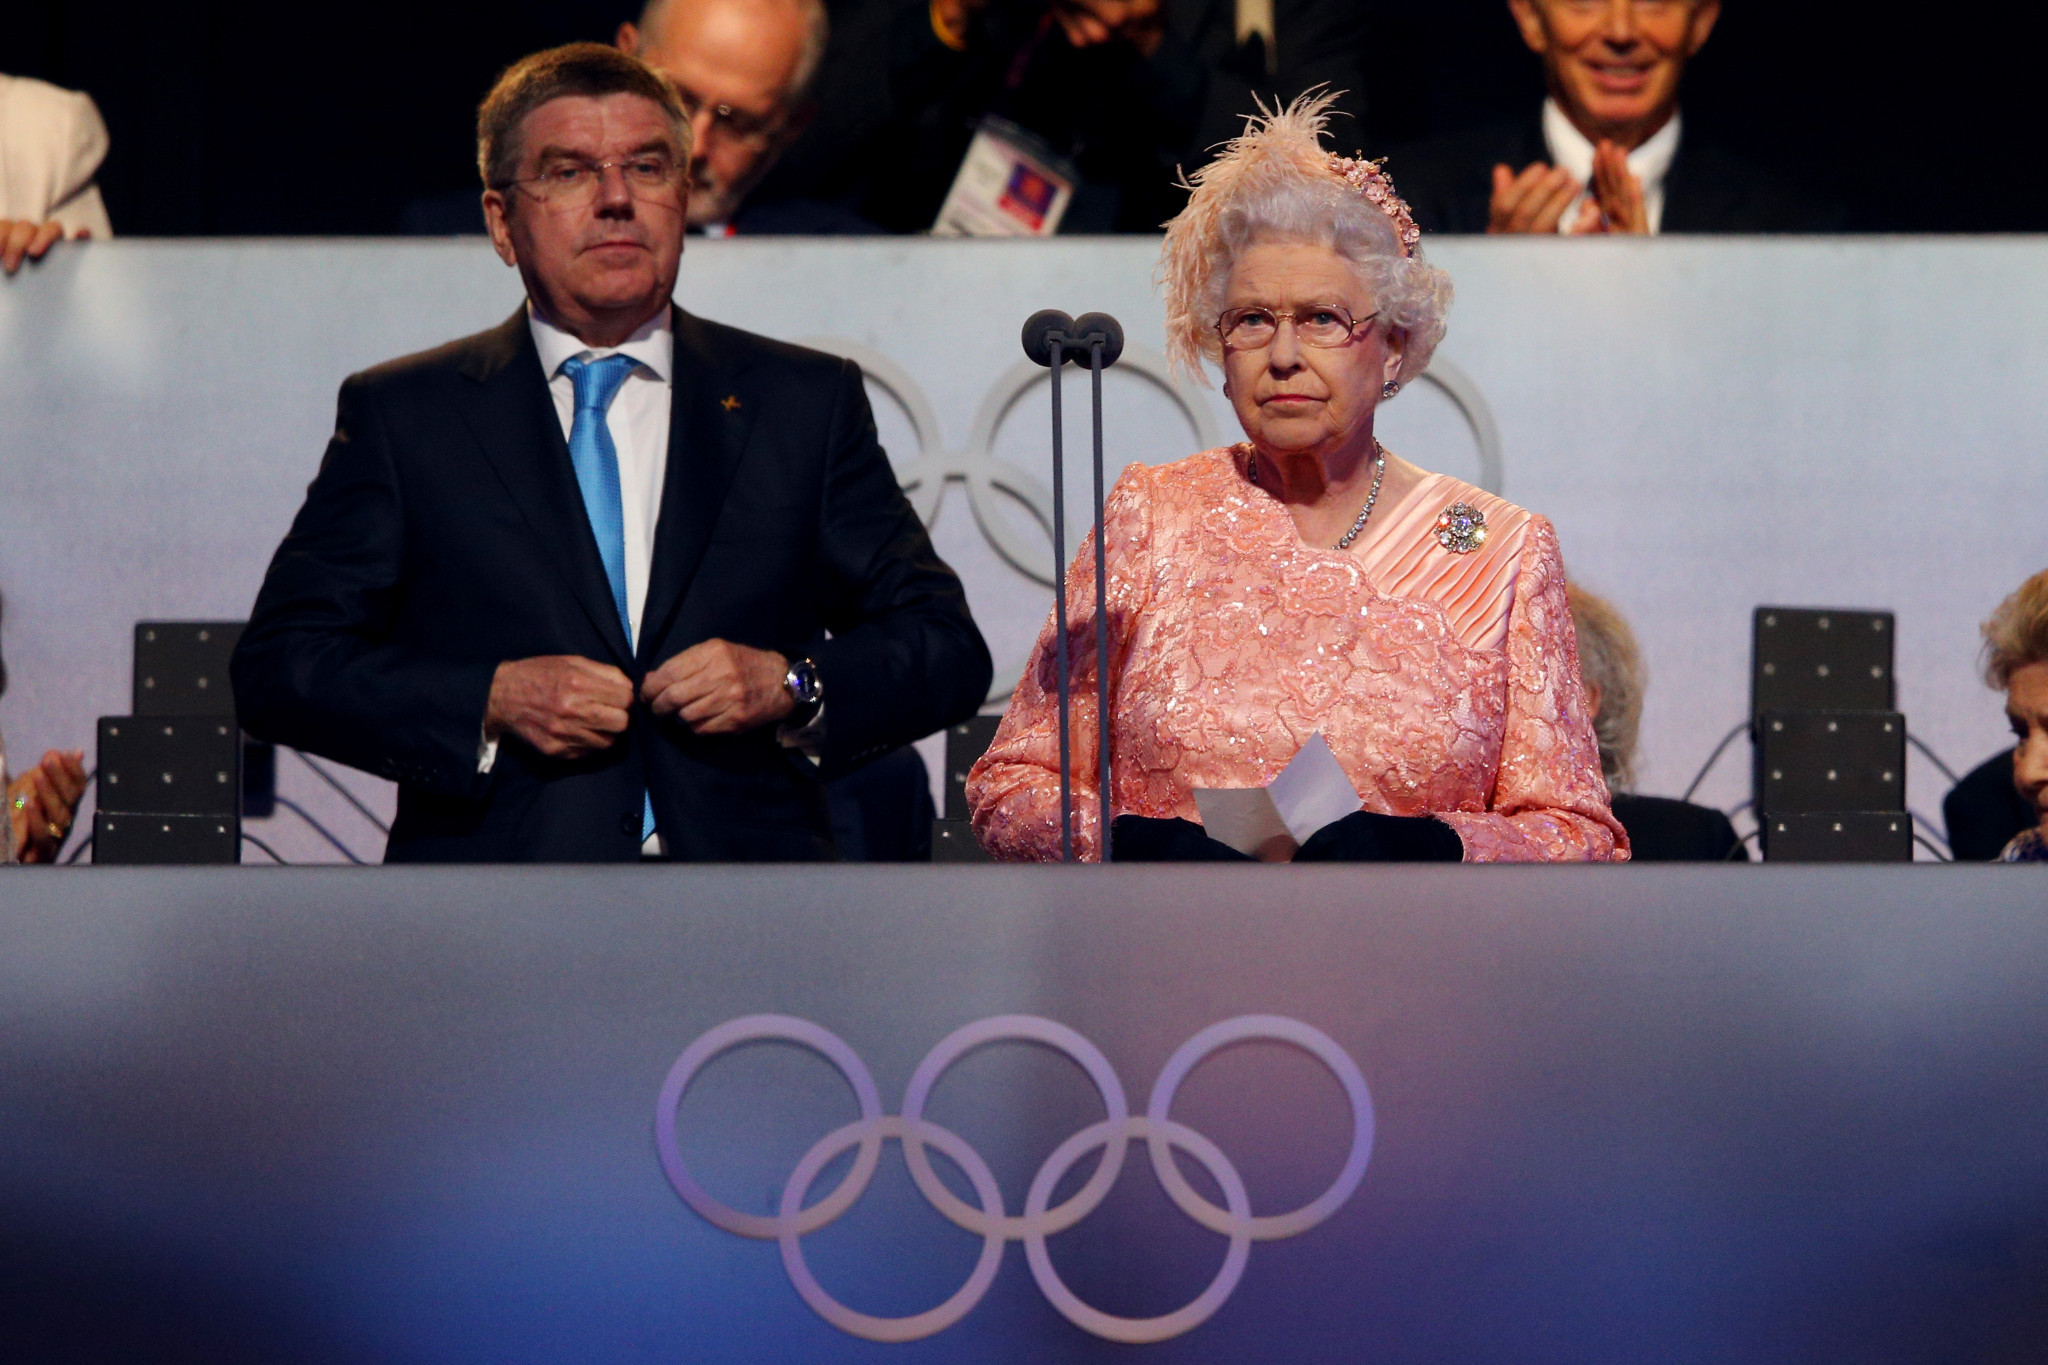 Tributes paid from across the world of sport following death of Queen Elizabeth II